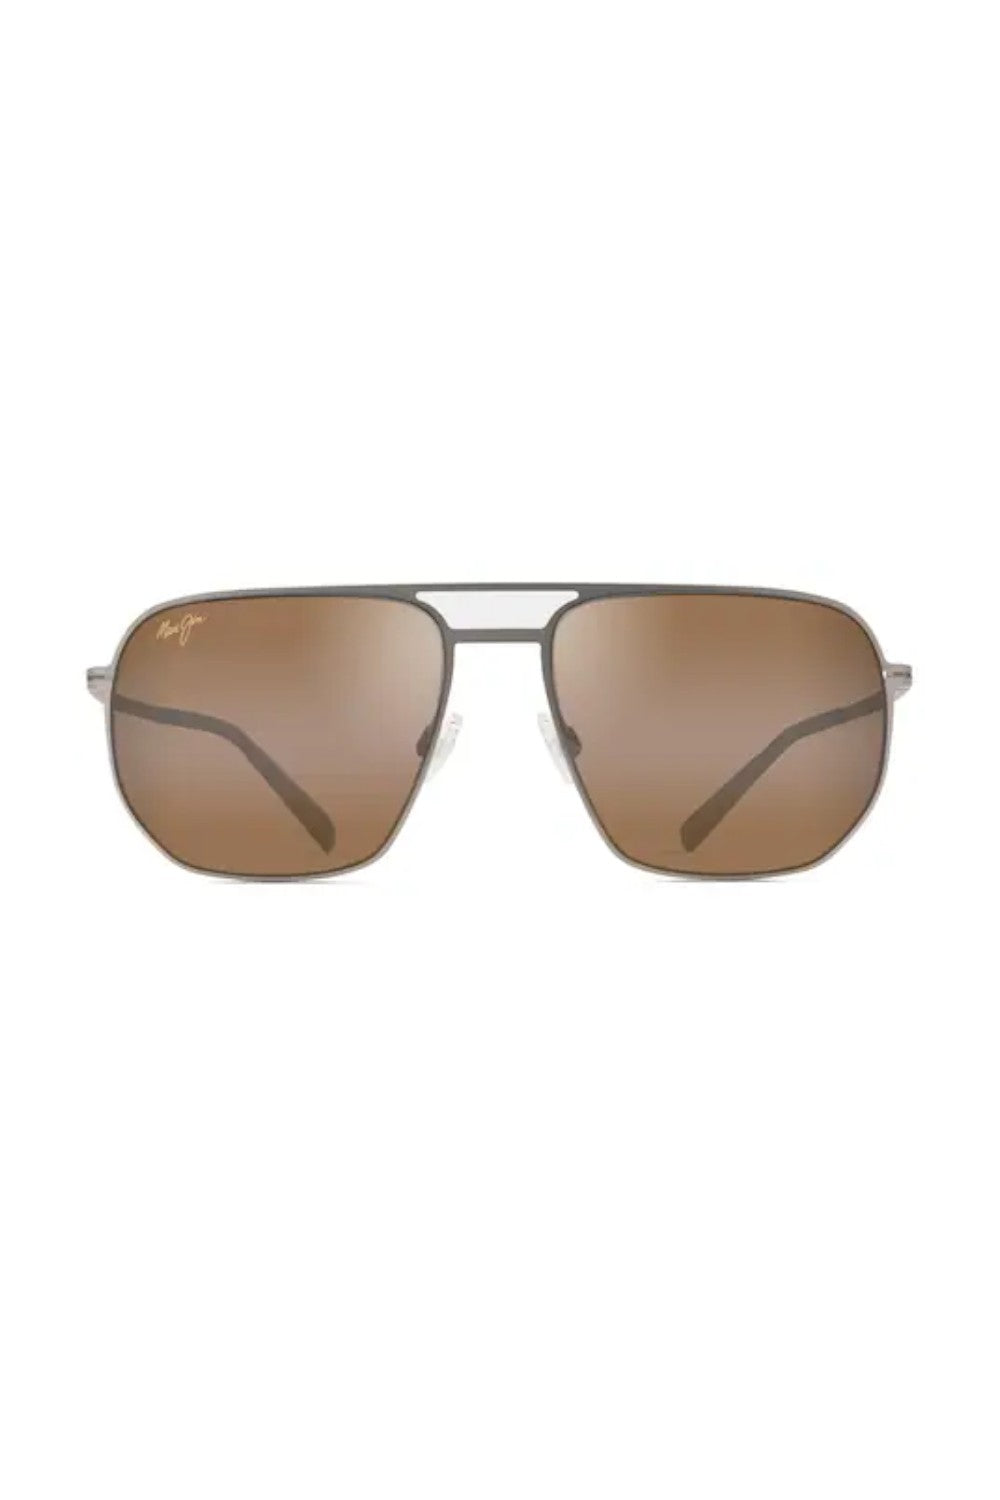 Shark’s Cove, inspired by the marvels awaiting to be discovered, features PolarizedPlus2® lenses to reveal the beauty that lies beneath. Crafted with precision, this thin stainless steel frame boasts a sophisticated appeal with a delicately carved framework encasing the lenses. At the intersection of style and functionality, Shark’s Cove pairs a sleek and lightweight aviator silhouette with MauiBrilliant™ lenses, making it the perfect companion for shoreline or citywide explorations.